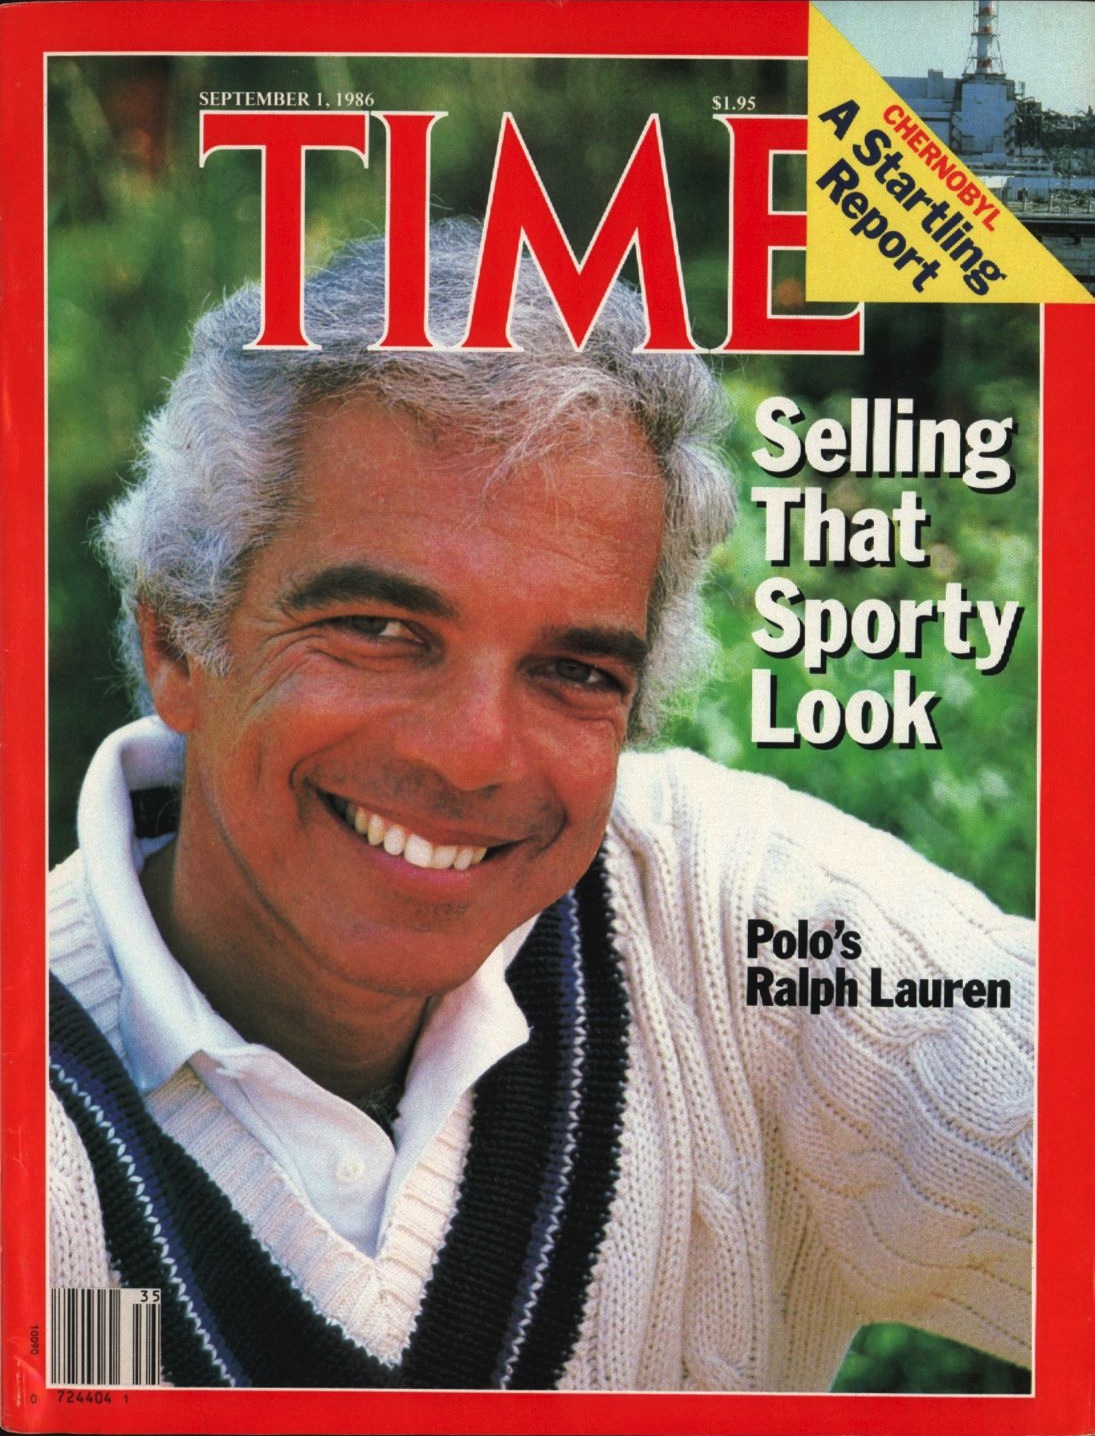 Ralph Lauren Stepping Down: How the Polo Shirt Came to Be